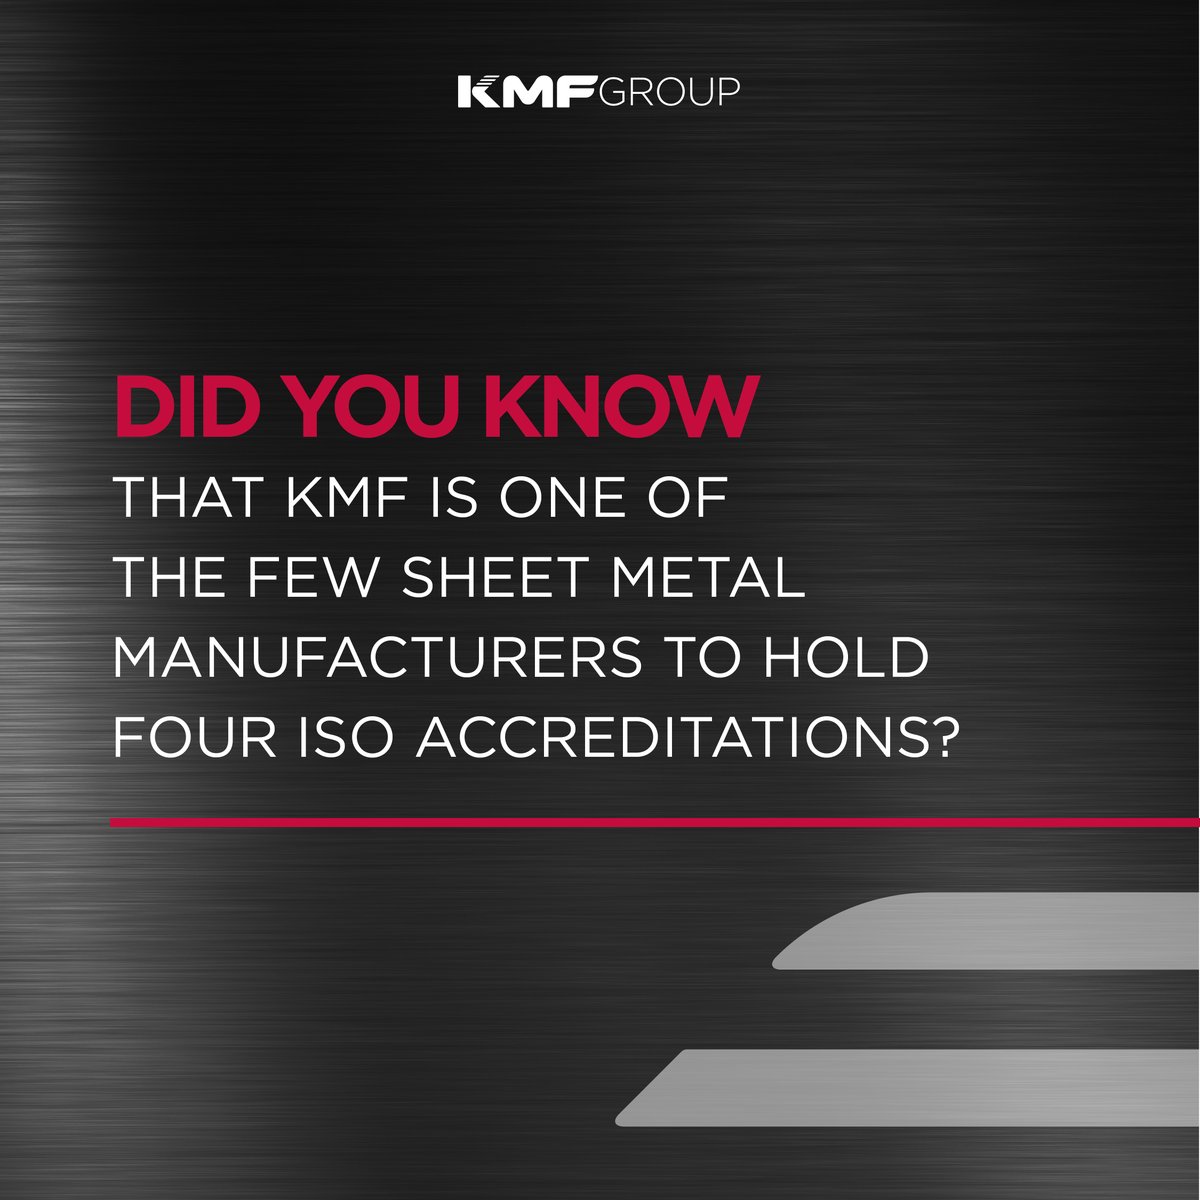 KMF is one of the few #sheetmetalmanufacturers to hold four #ISOaccreditations bit.ly/3GltSko #qualitystandard